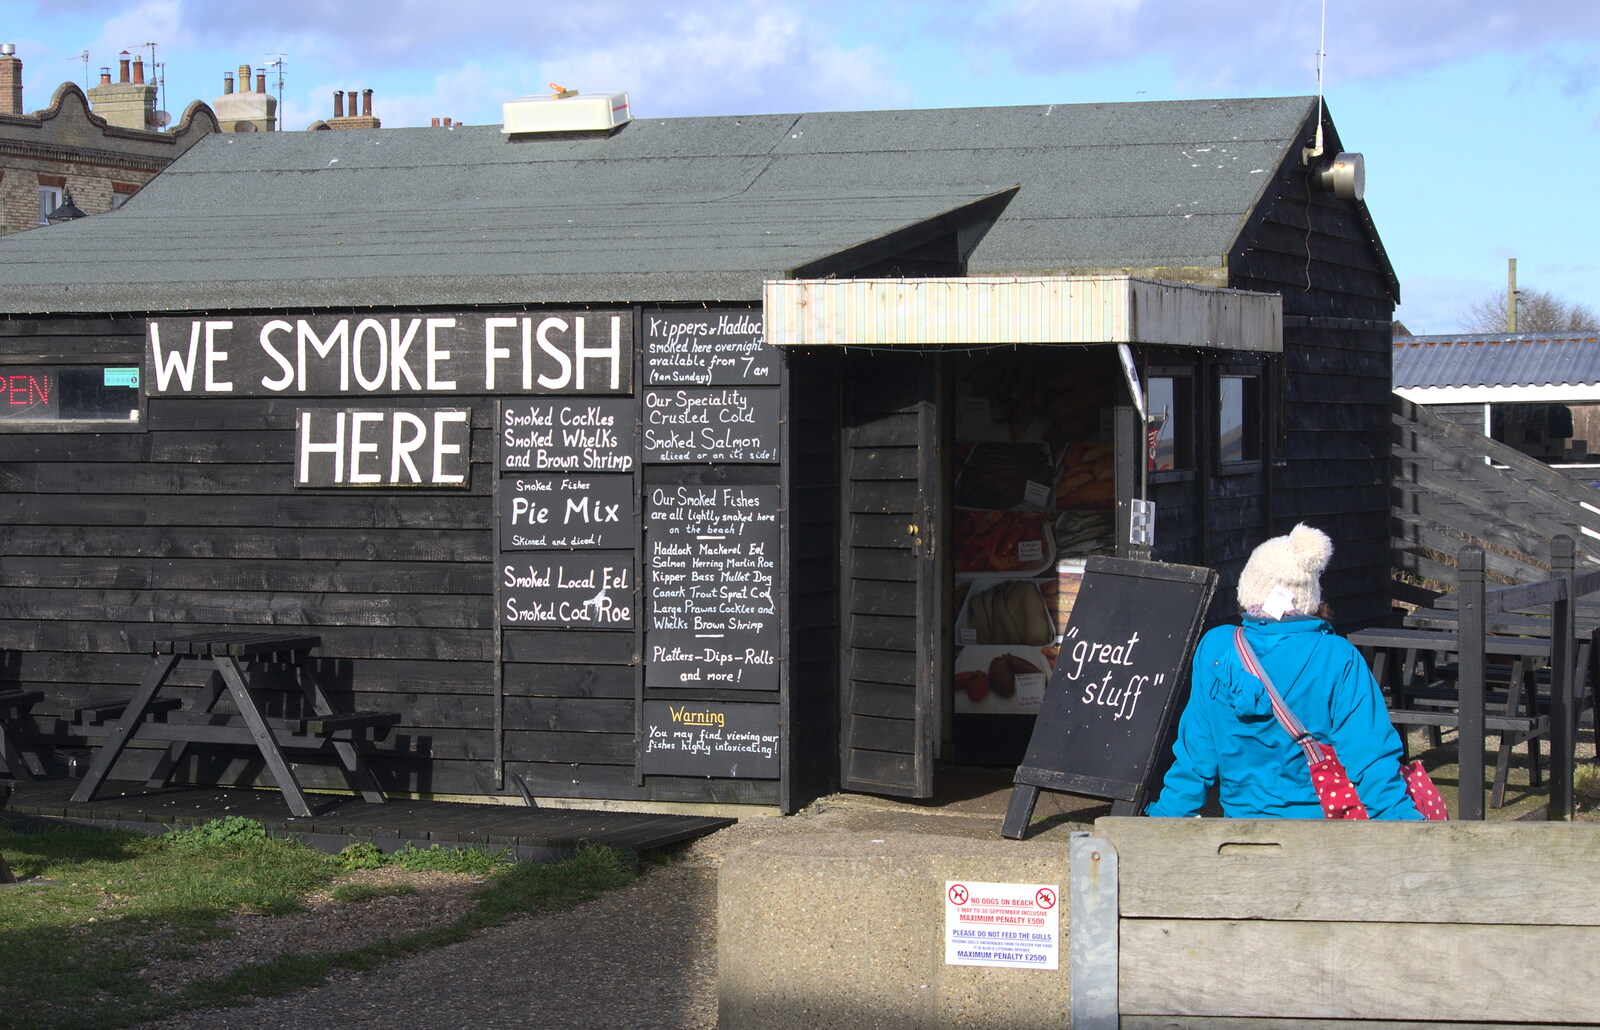 A Trip to Aldeburgh, Suffolk - 7th February 2016: Isobel hangs around outside a fish hut